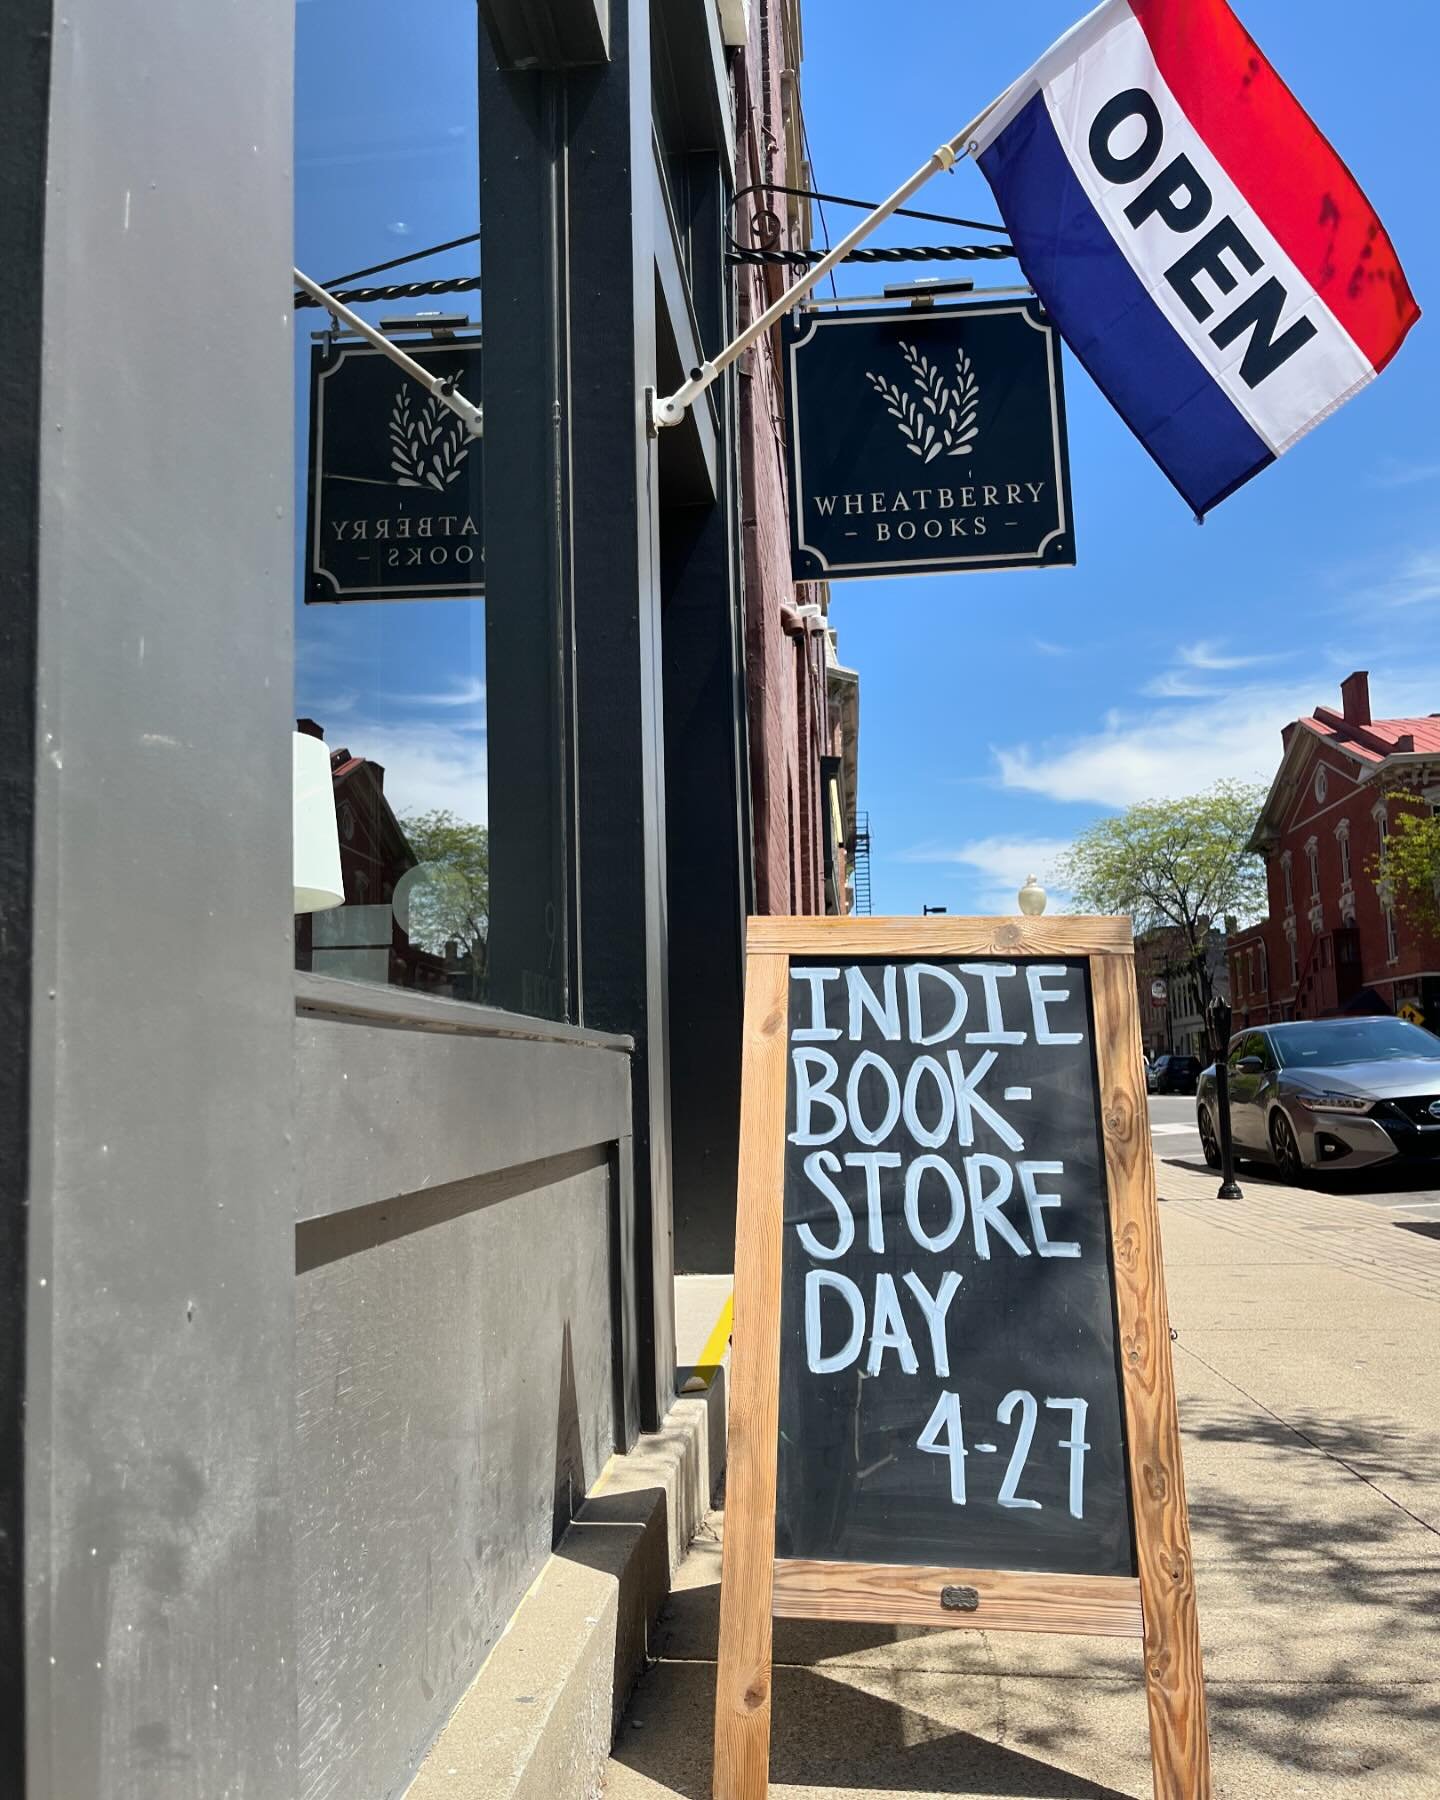 Mark your calendars for tomorrow! Bookstores across the nation will be celebrating the 11th annual Independent Bookstore Day 🎈